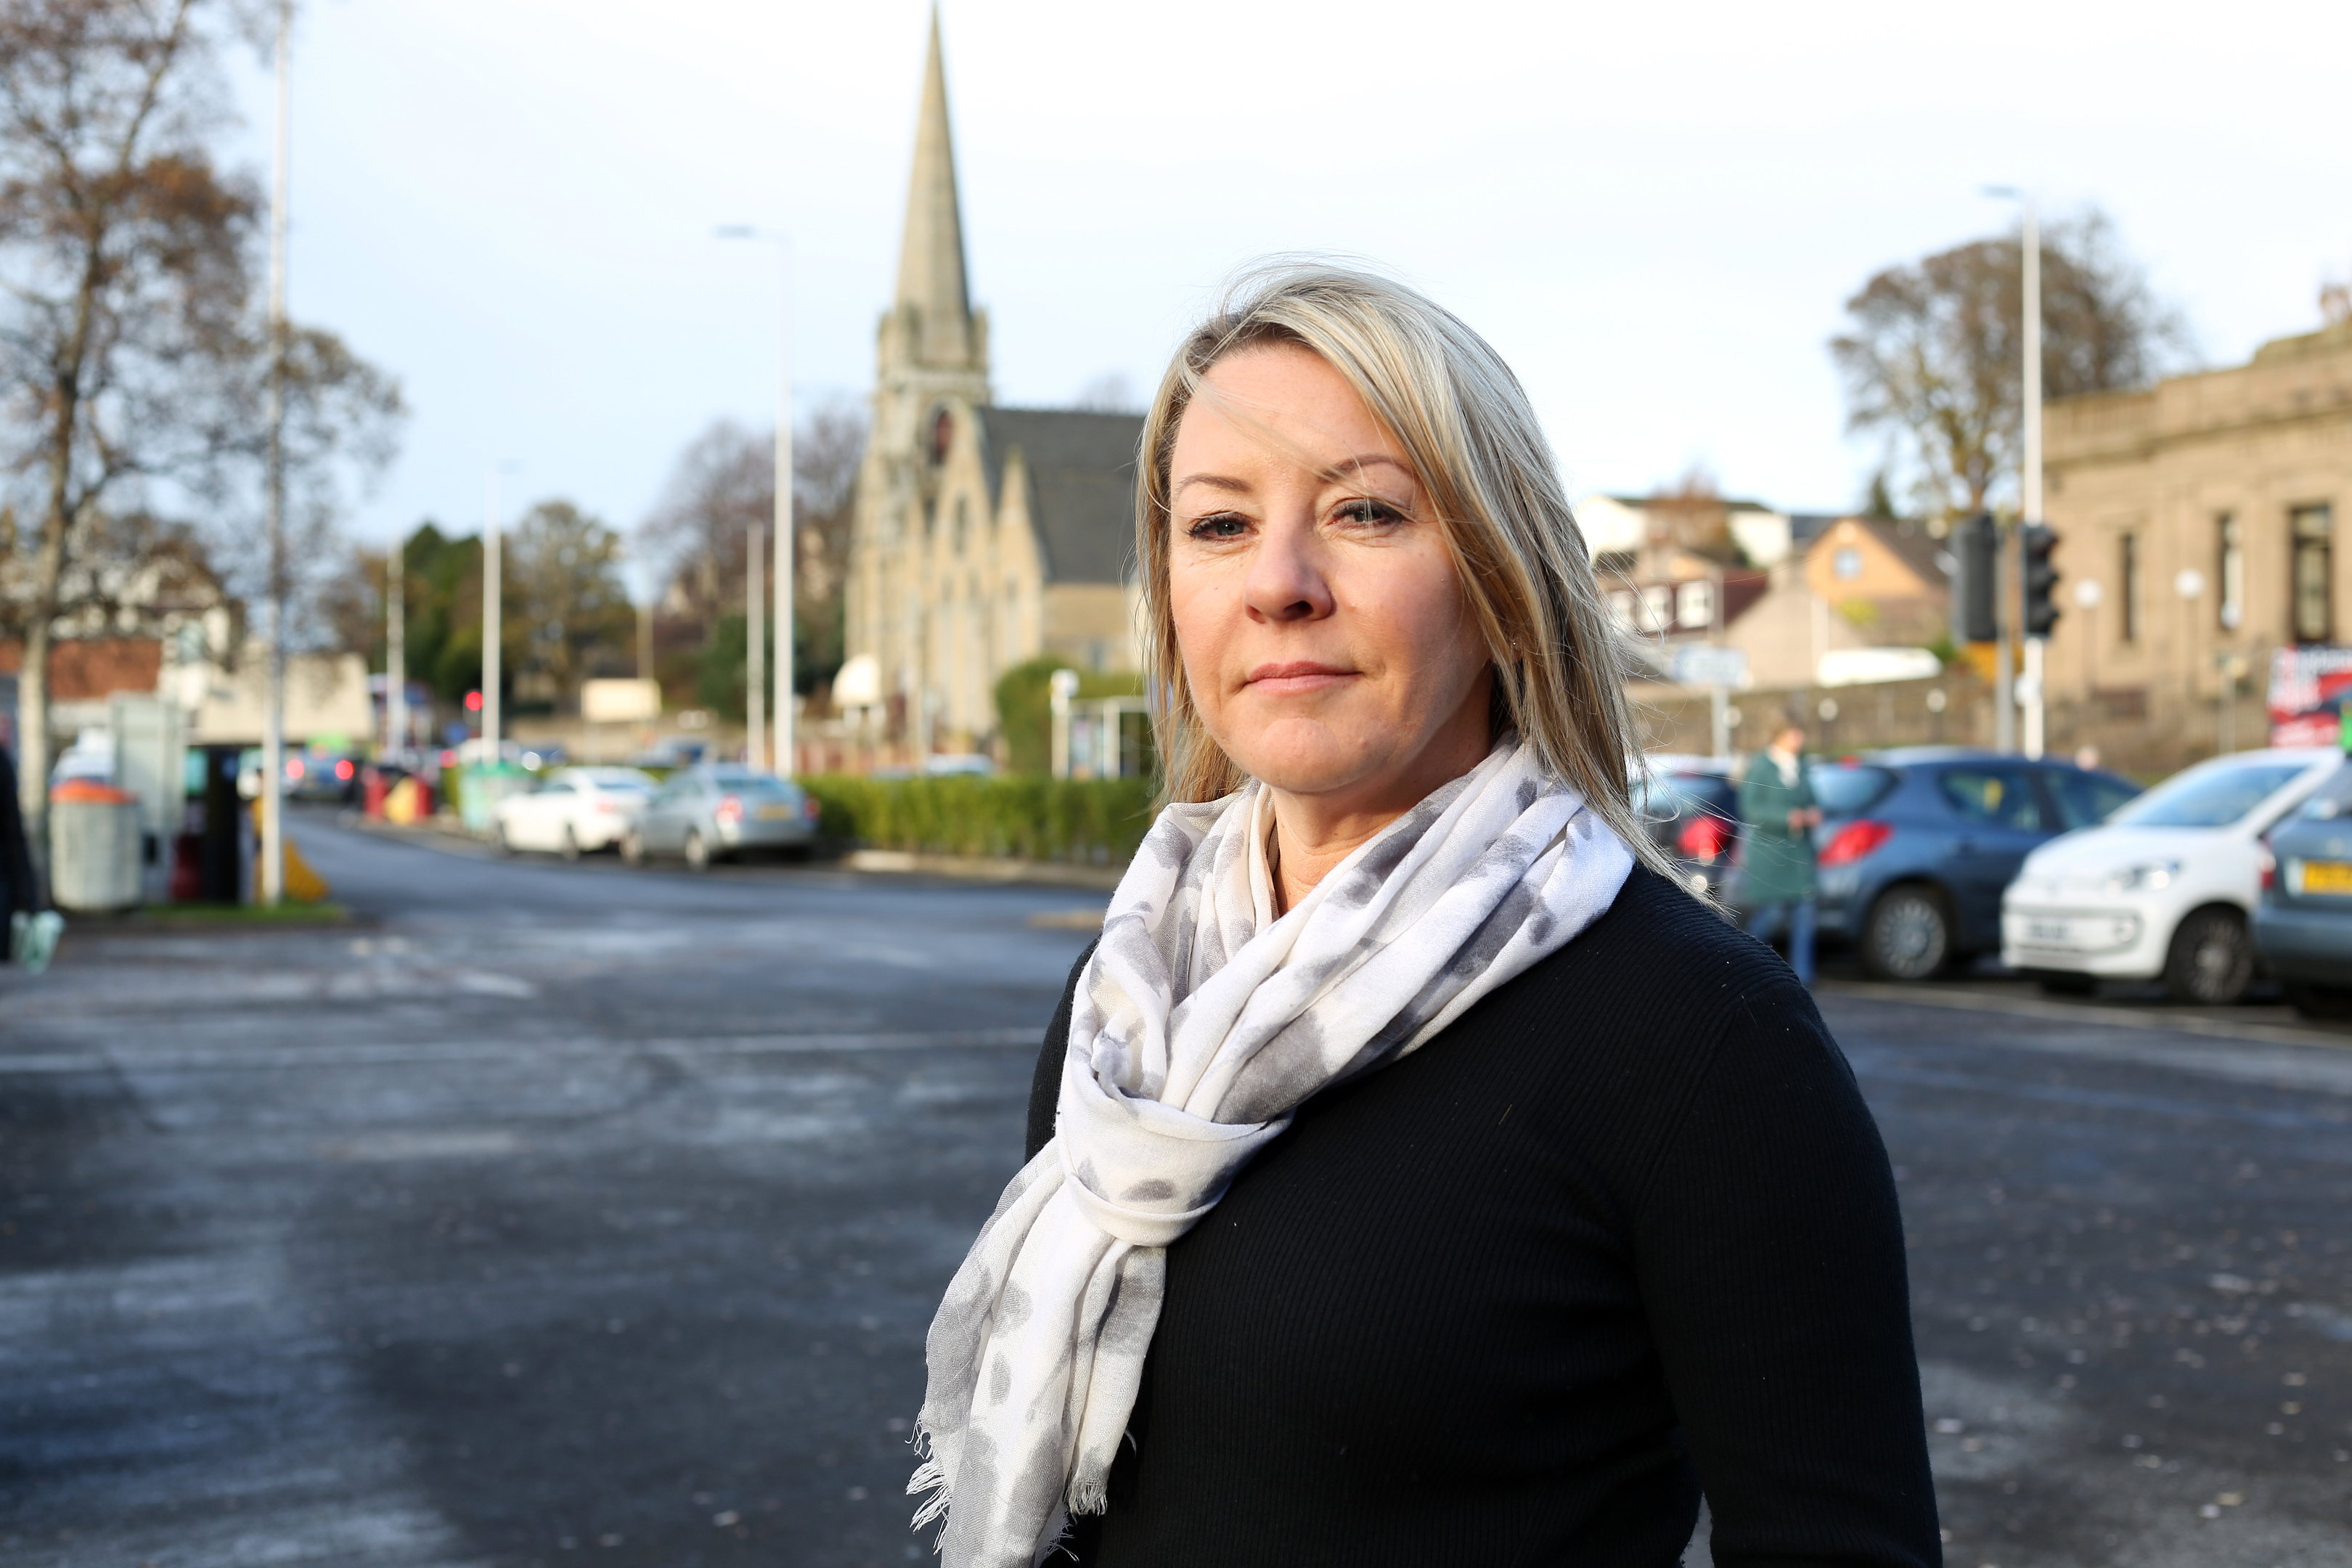 Pauline wants the council to ensure the area is properly gritted.